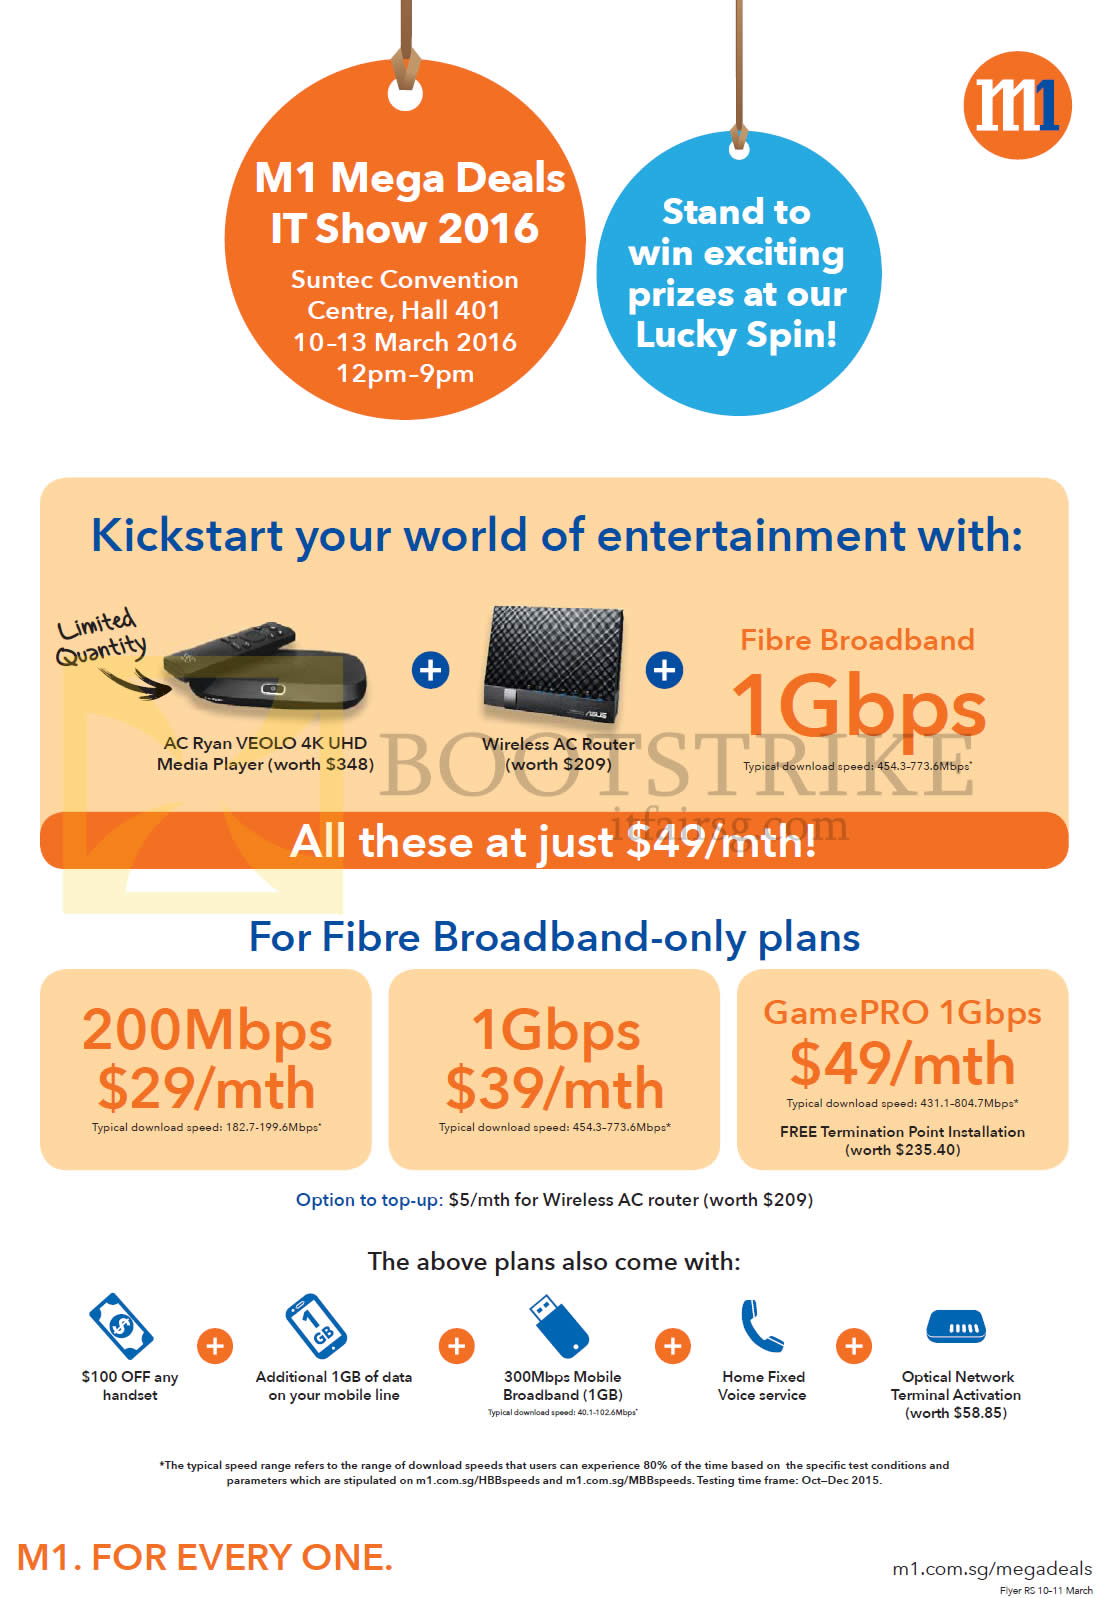 IT SHOW 2016 price list image brochure of M1 Fibre Broadband 39.00 1Gbps, 29.00 200Mbps, 49.00 GamePRO 1Gbps